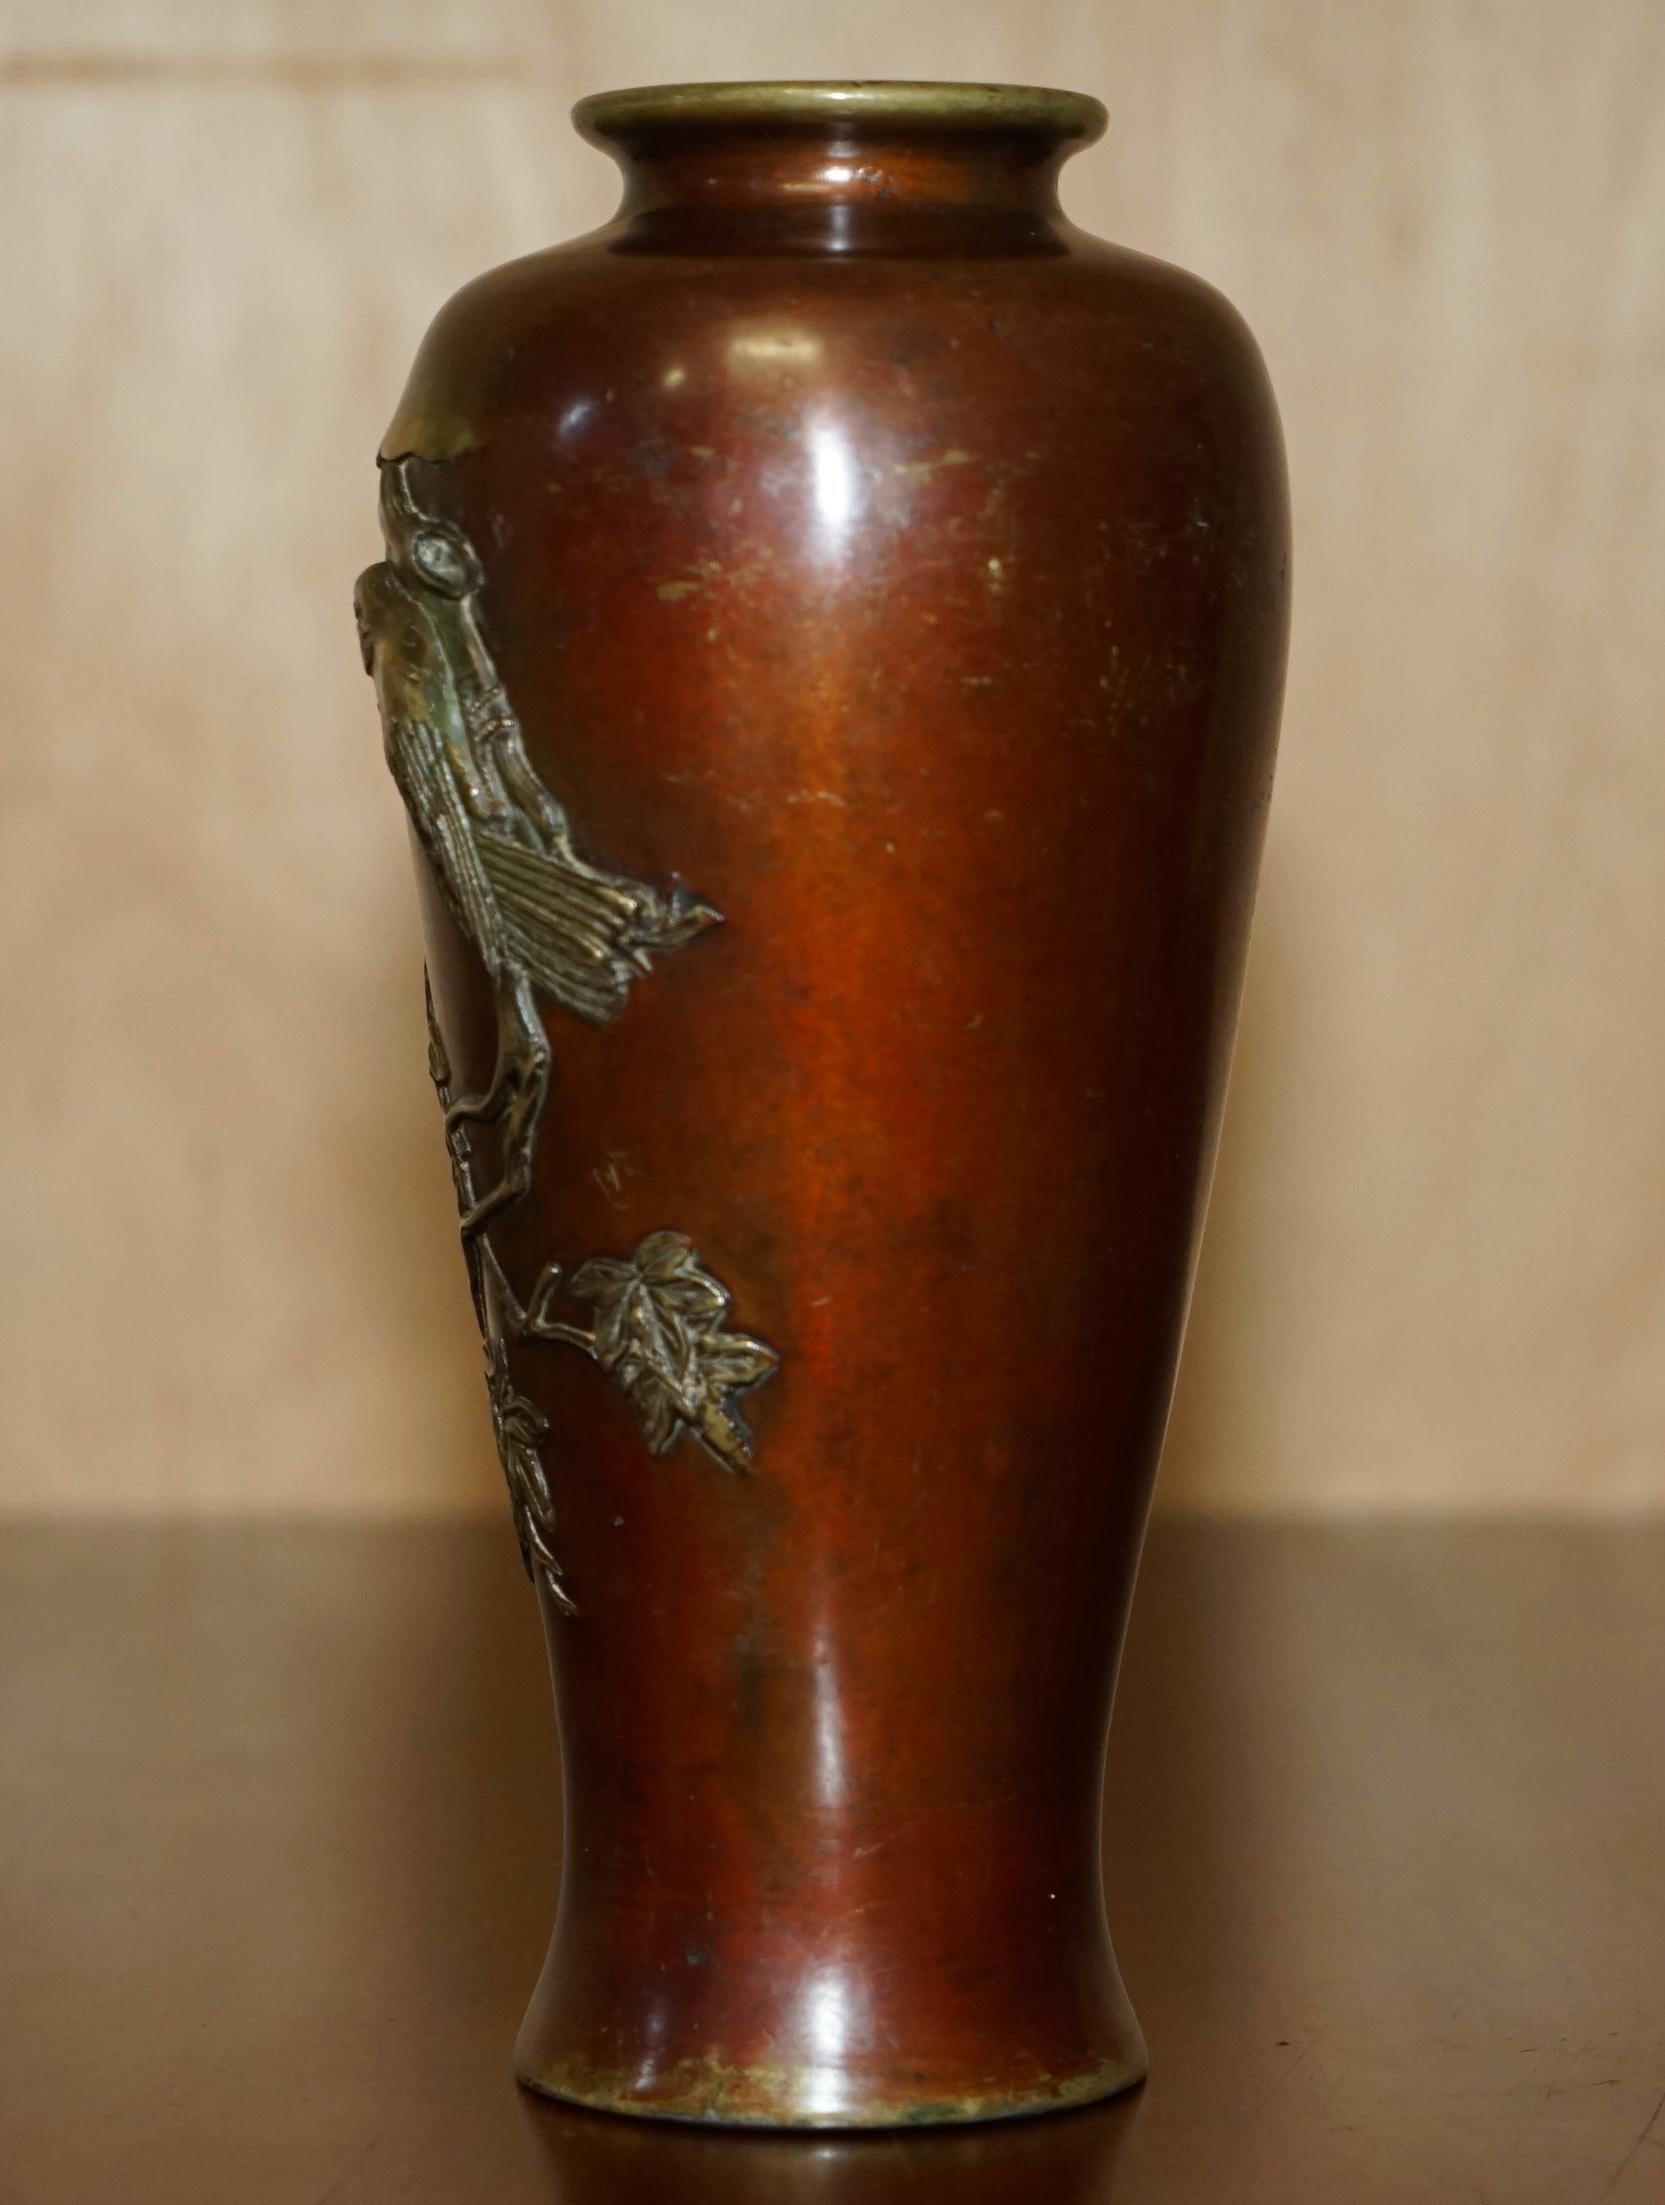 STUNNING SiGNED ANTIQUE CIRCA 1870 JAPANESE VASE DEPICTING A BIRD ON A BRANCH For Sale 1